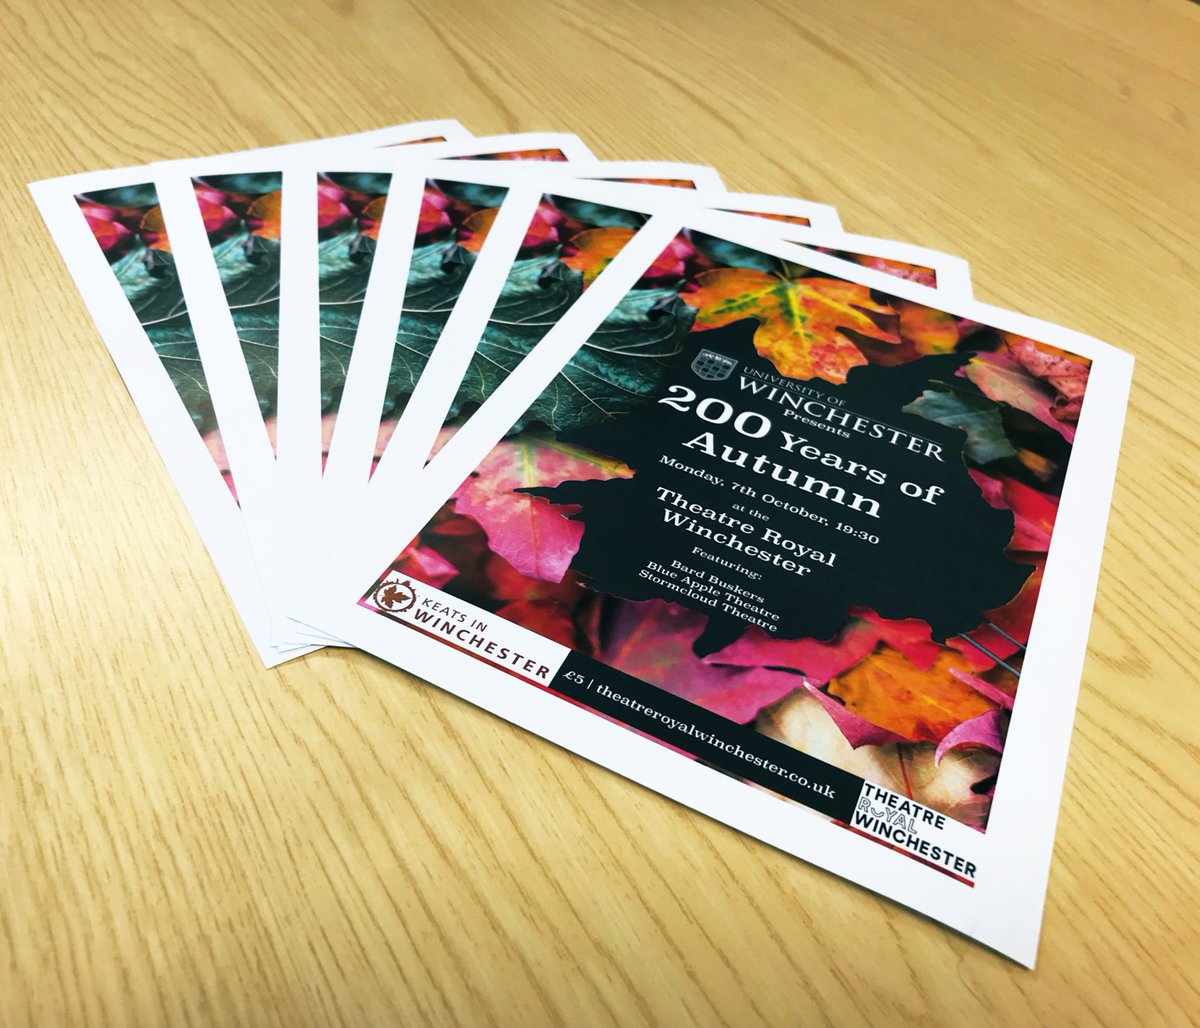 Flyers are printed! 😱 And distributed! 🤩 find them at @TRwinchester @King_Alf @WinchesterDC @WaterstonesWTB @WstonesWinch @GreatHallWinch @winchestercitymuseum keep your eyes peeled ✨🍃🍂🍁